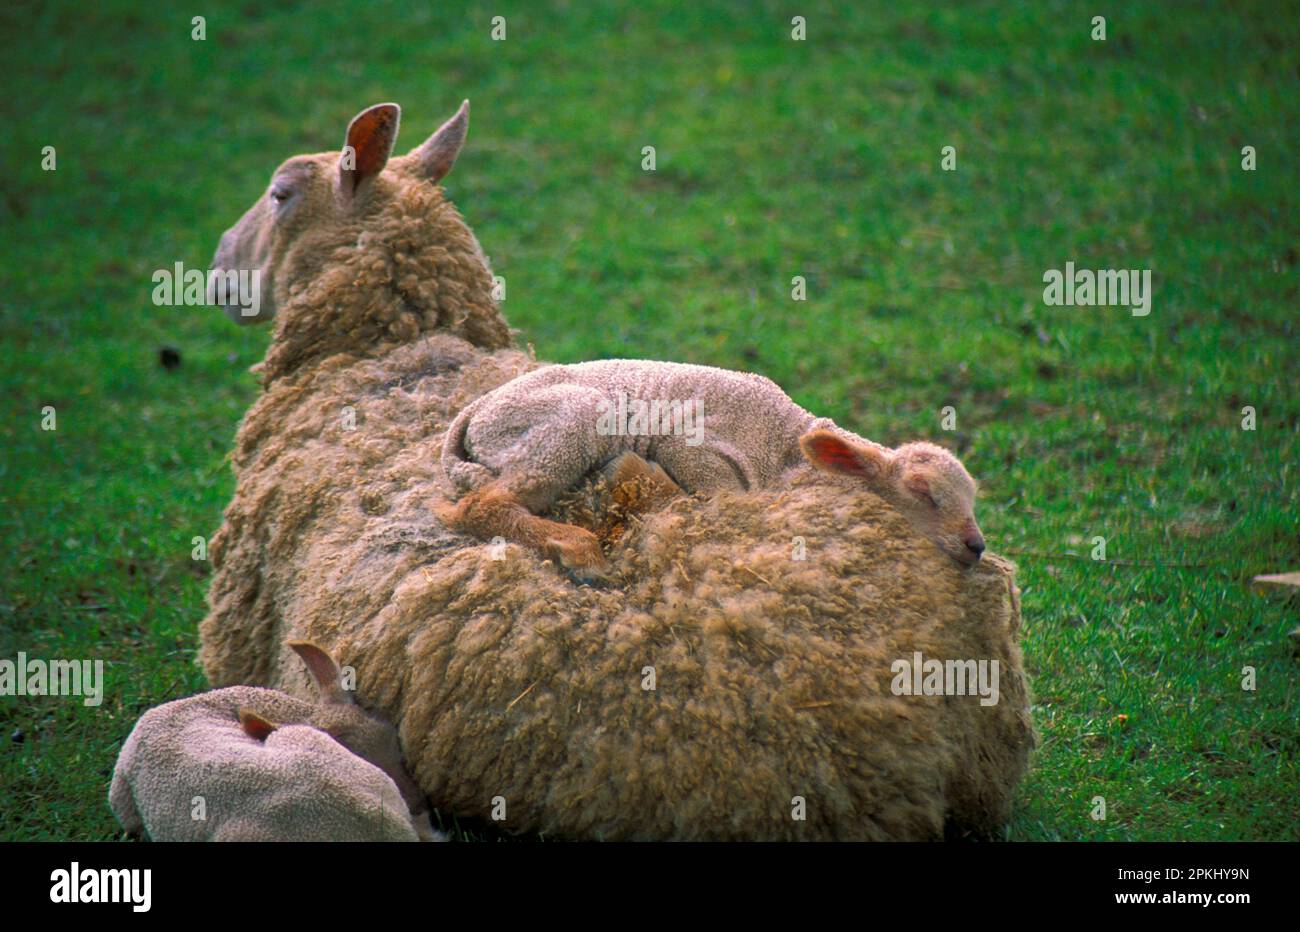 Blue-faced Leicester sheep. Sheep and sleeping lambs, a lamb sleeping on its mother Stock Photo